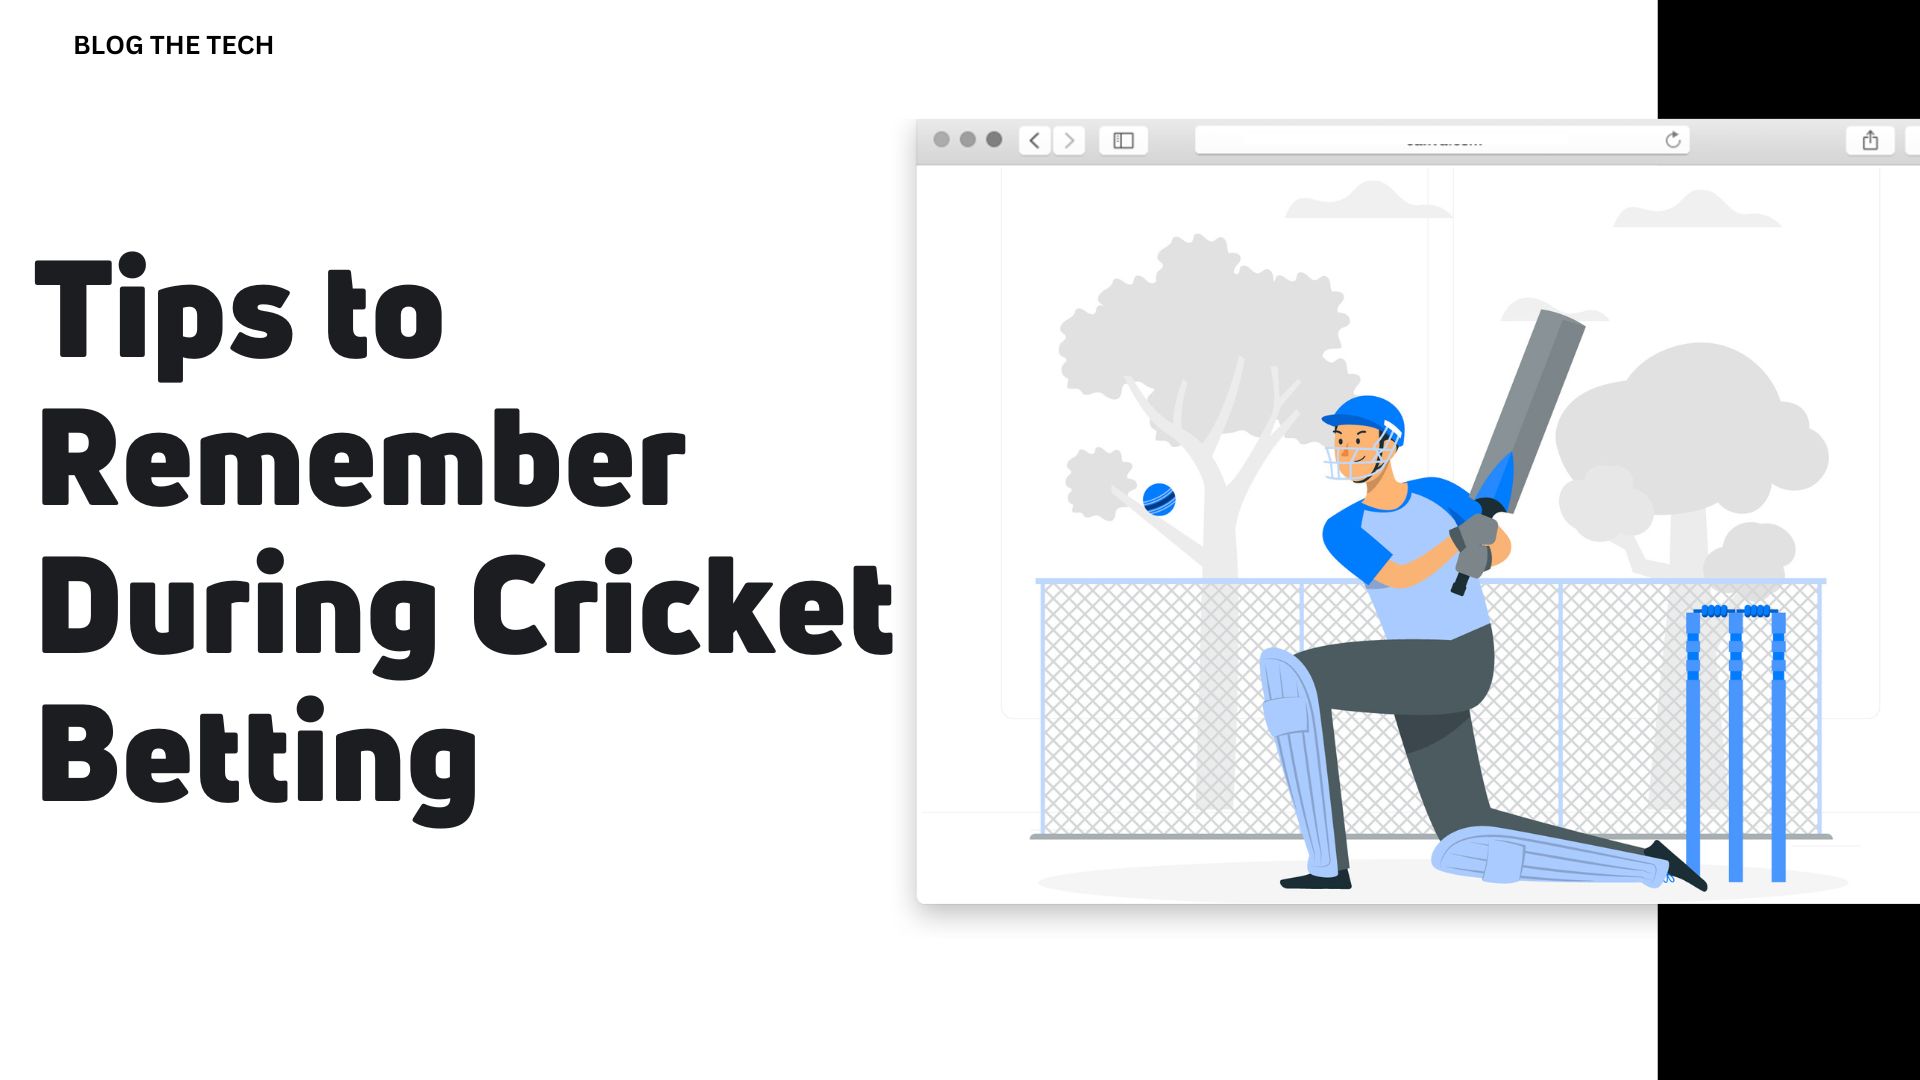 Tips to Remember During Cricket Betting